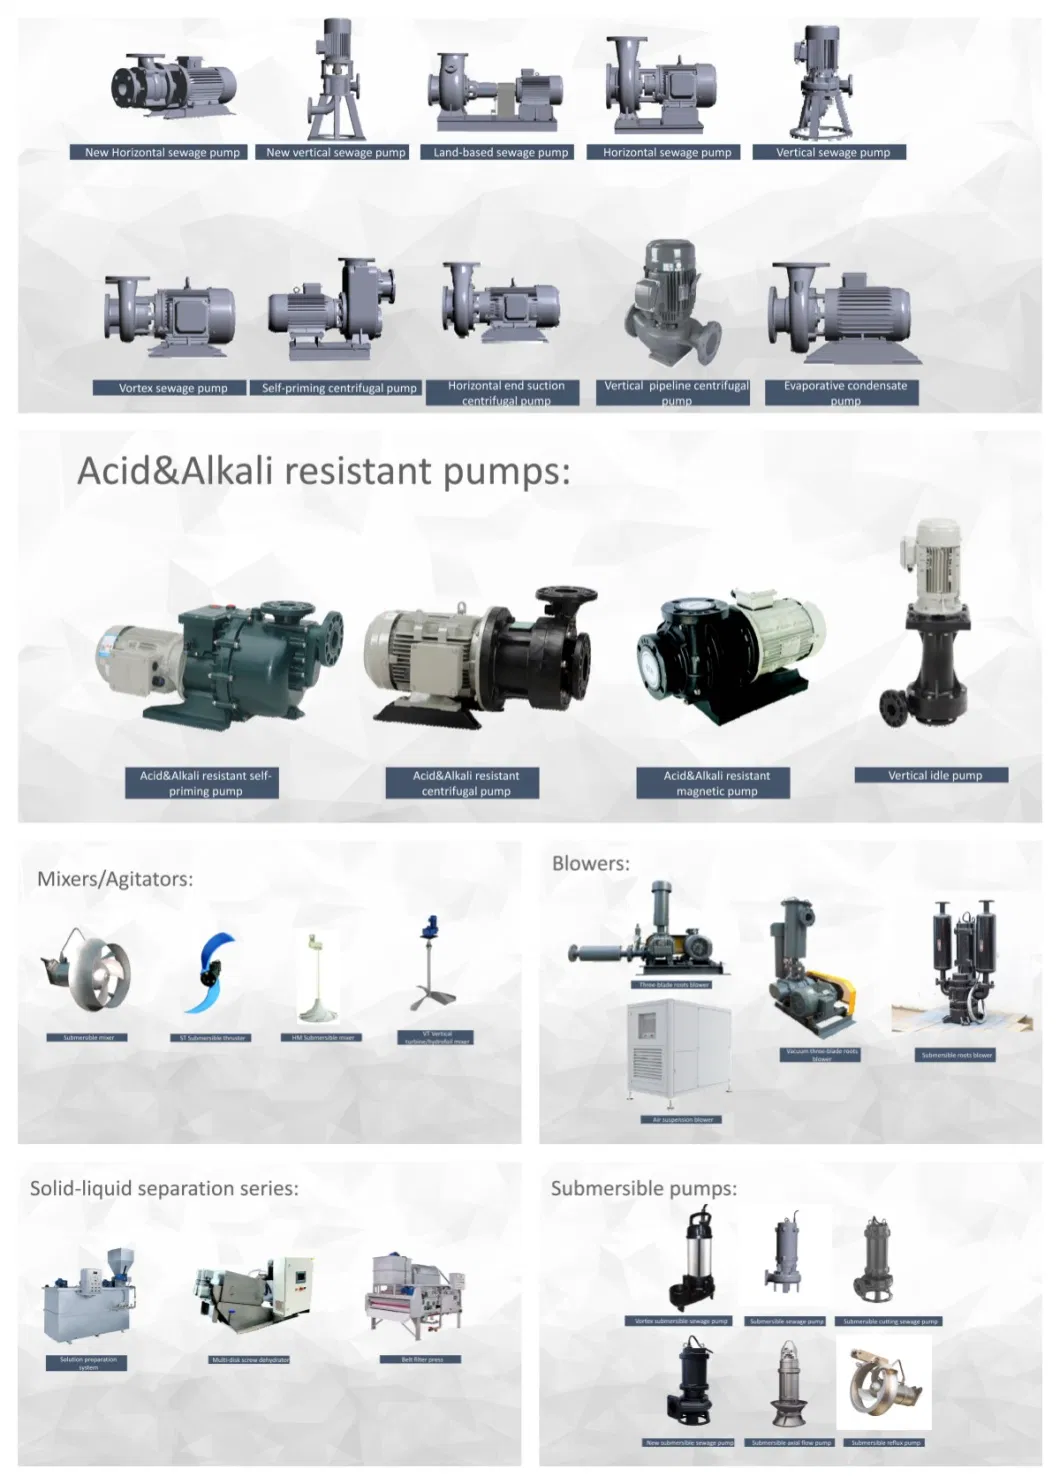 Fish Pond Aeration Blower Roots Blower Three Blade Blower Pneumatic Conveying System